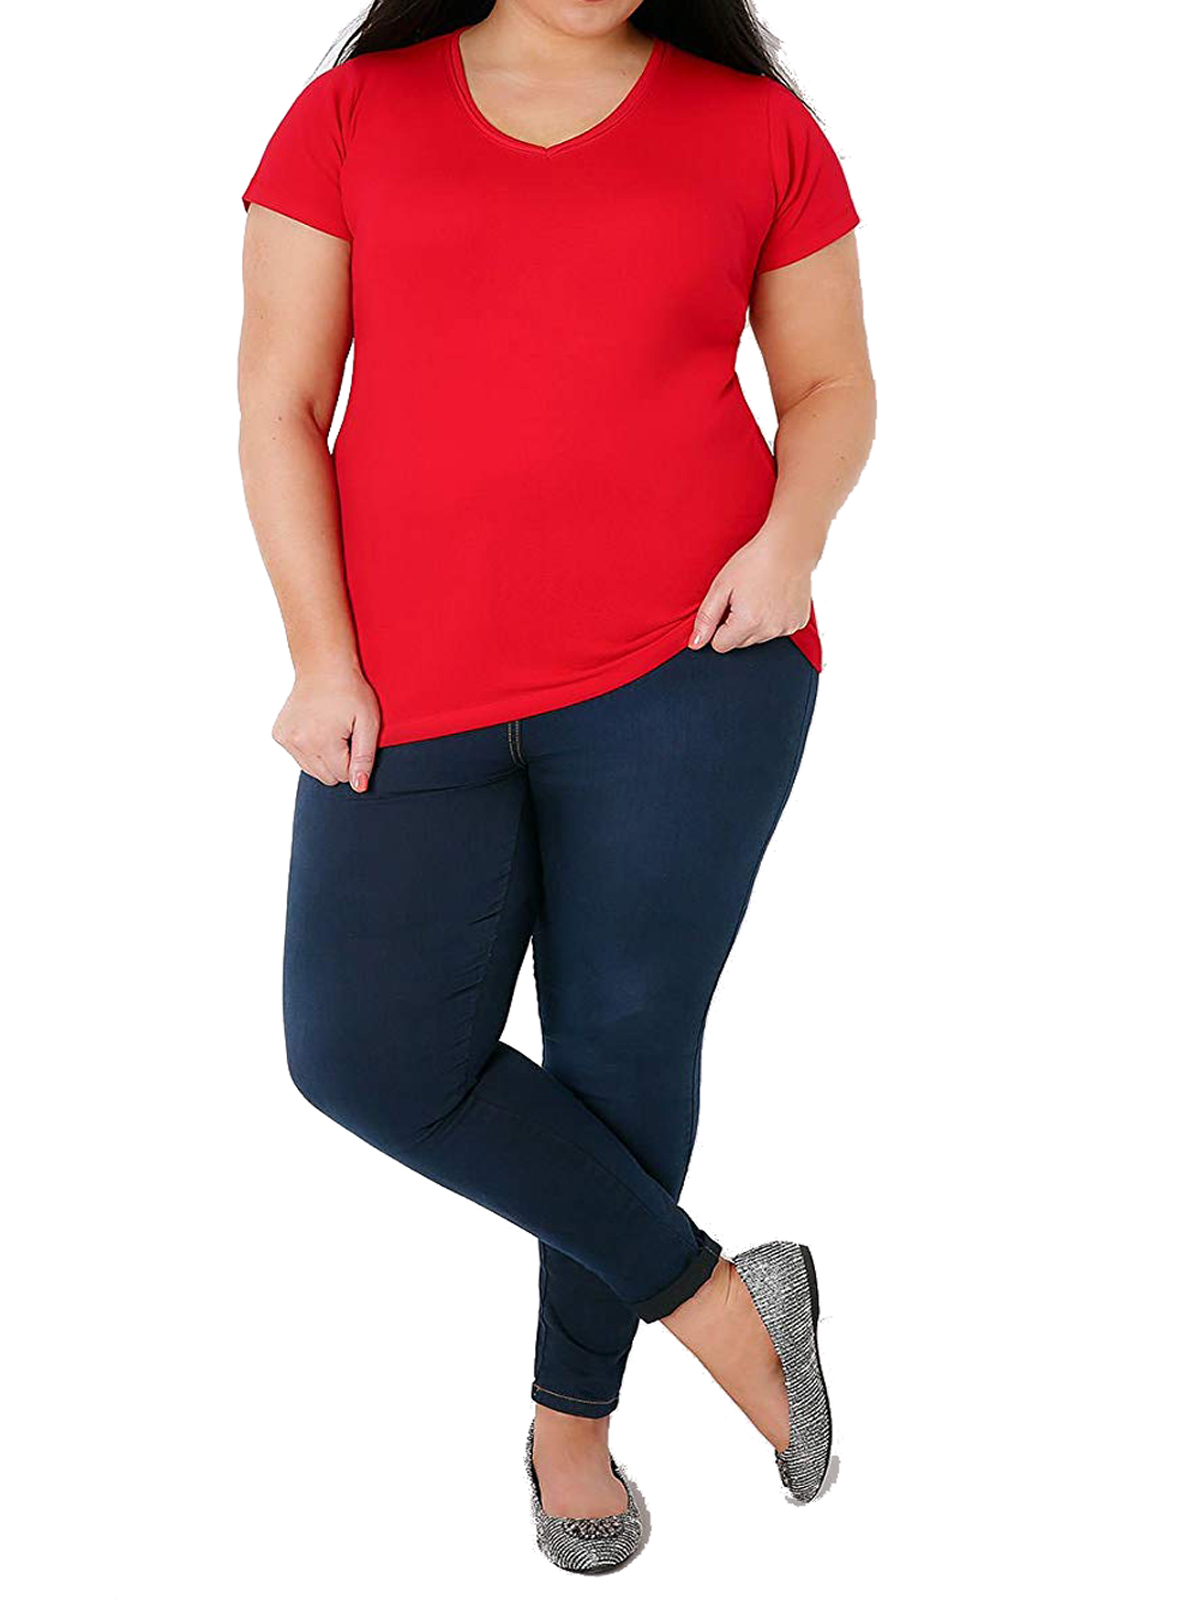 Y0urs Yours Red Pure Cotton Ribbed V Neck T Shirt Plus Size 16 To